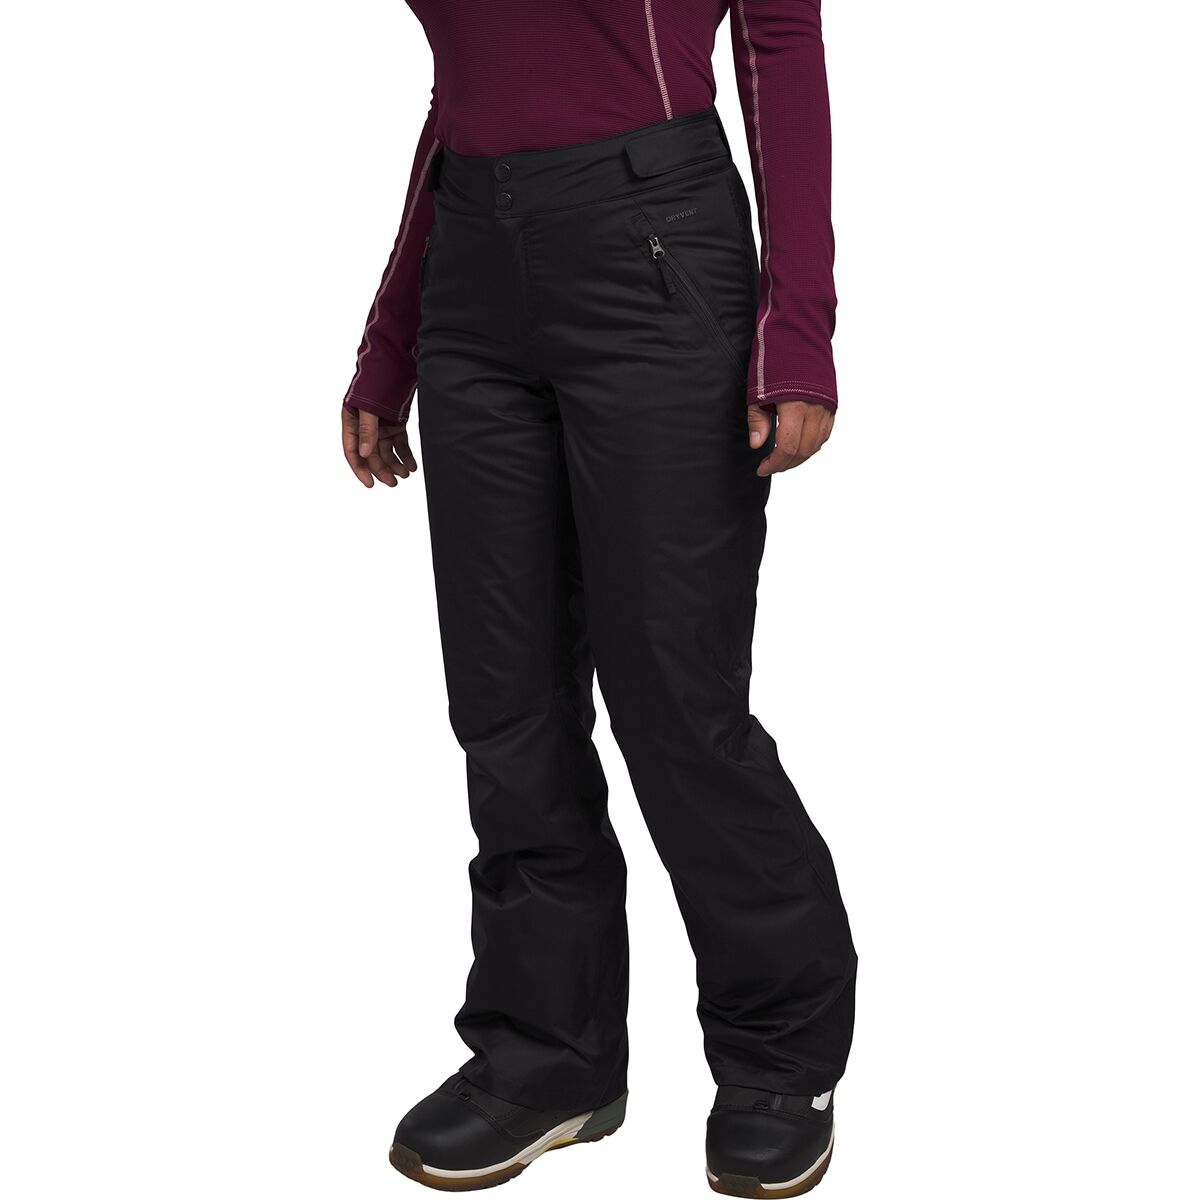 Sally Insulated Pant - Women